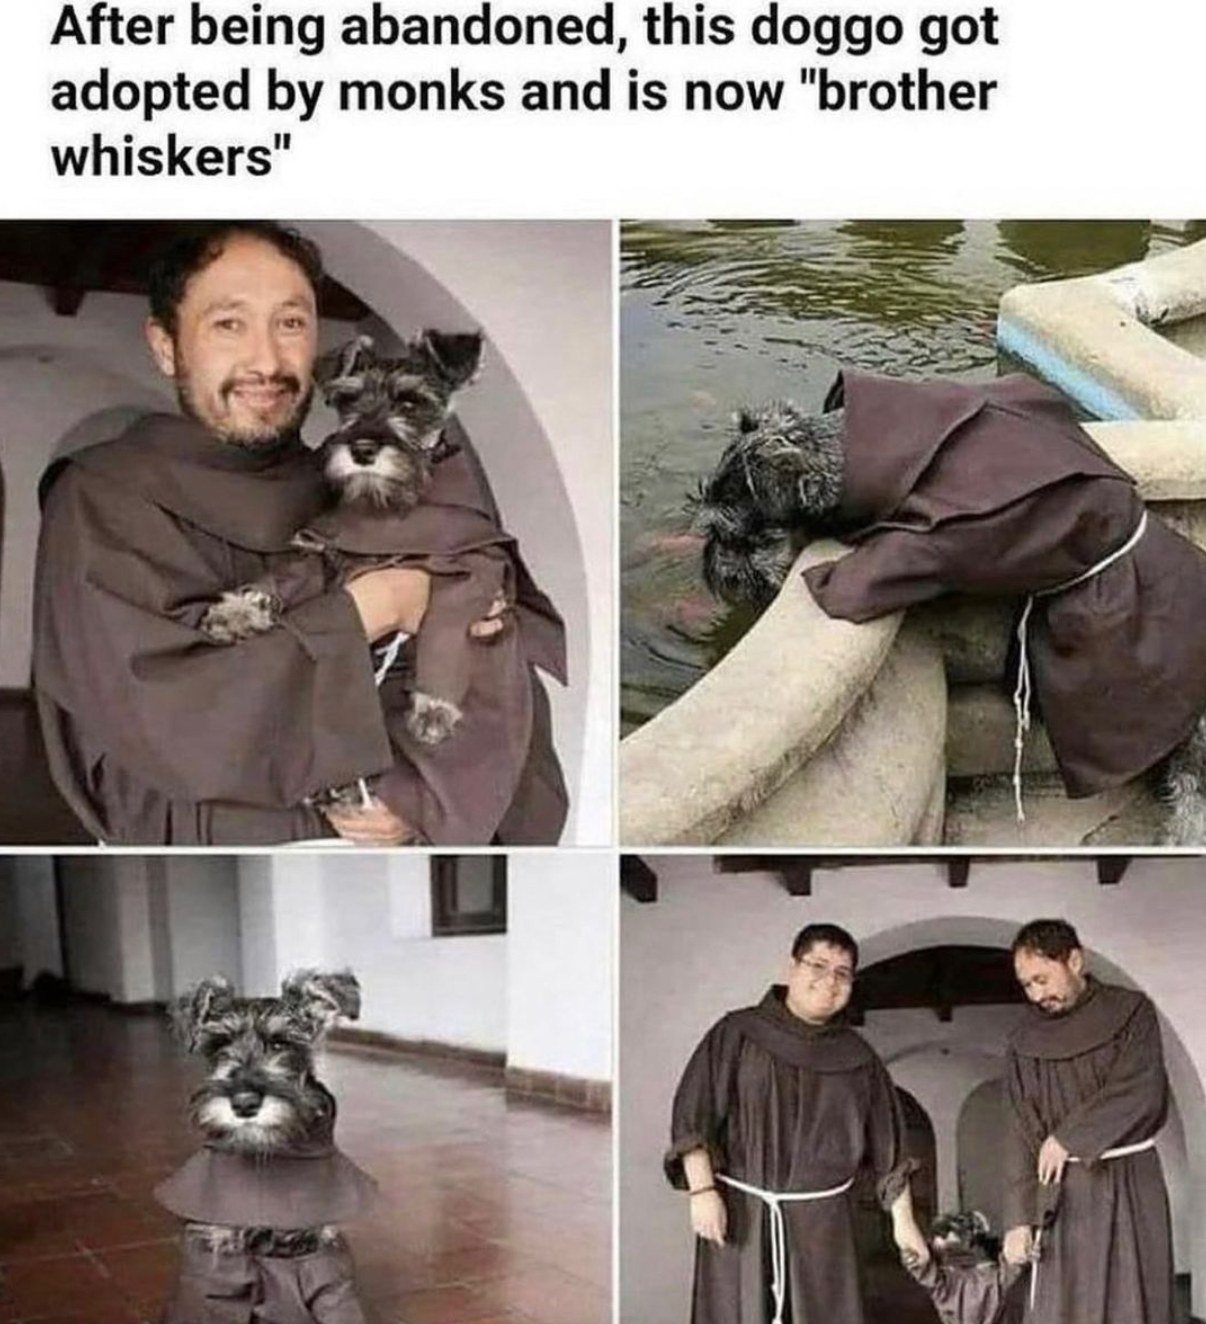 monday morning randomness - brother whiskers monk - After being abandoned, this doggo got adopted by monks and is now "brother whiskers"